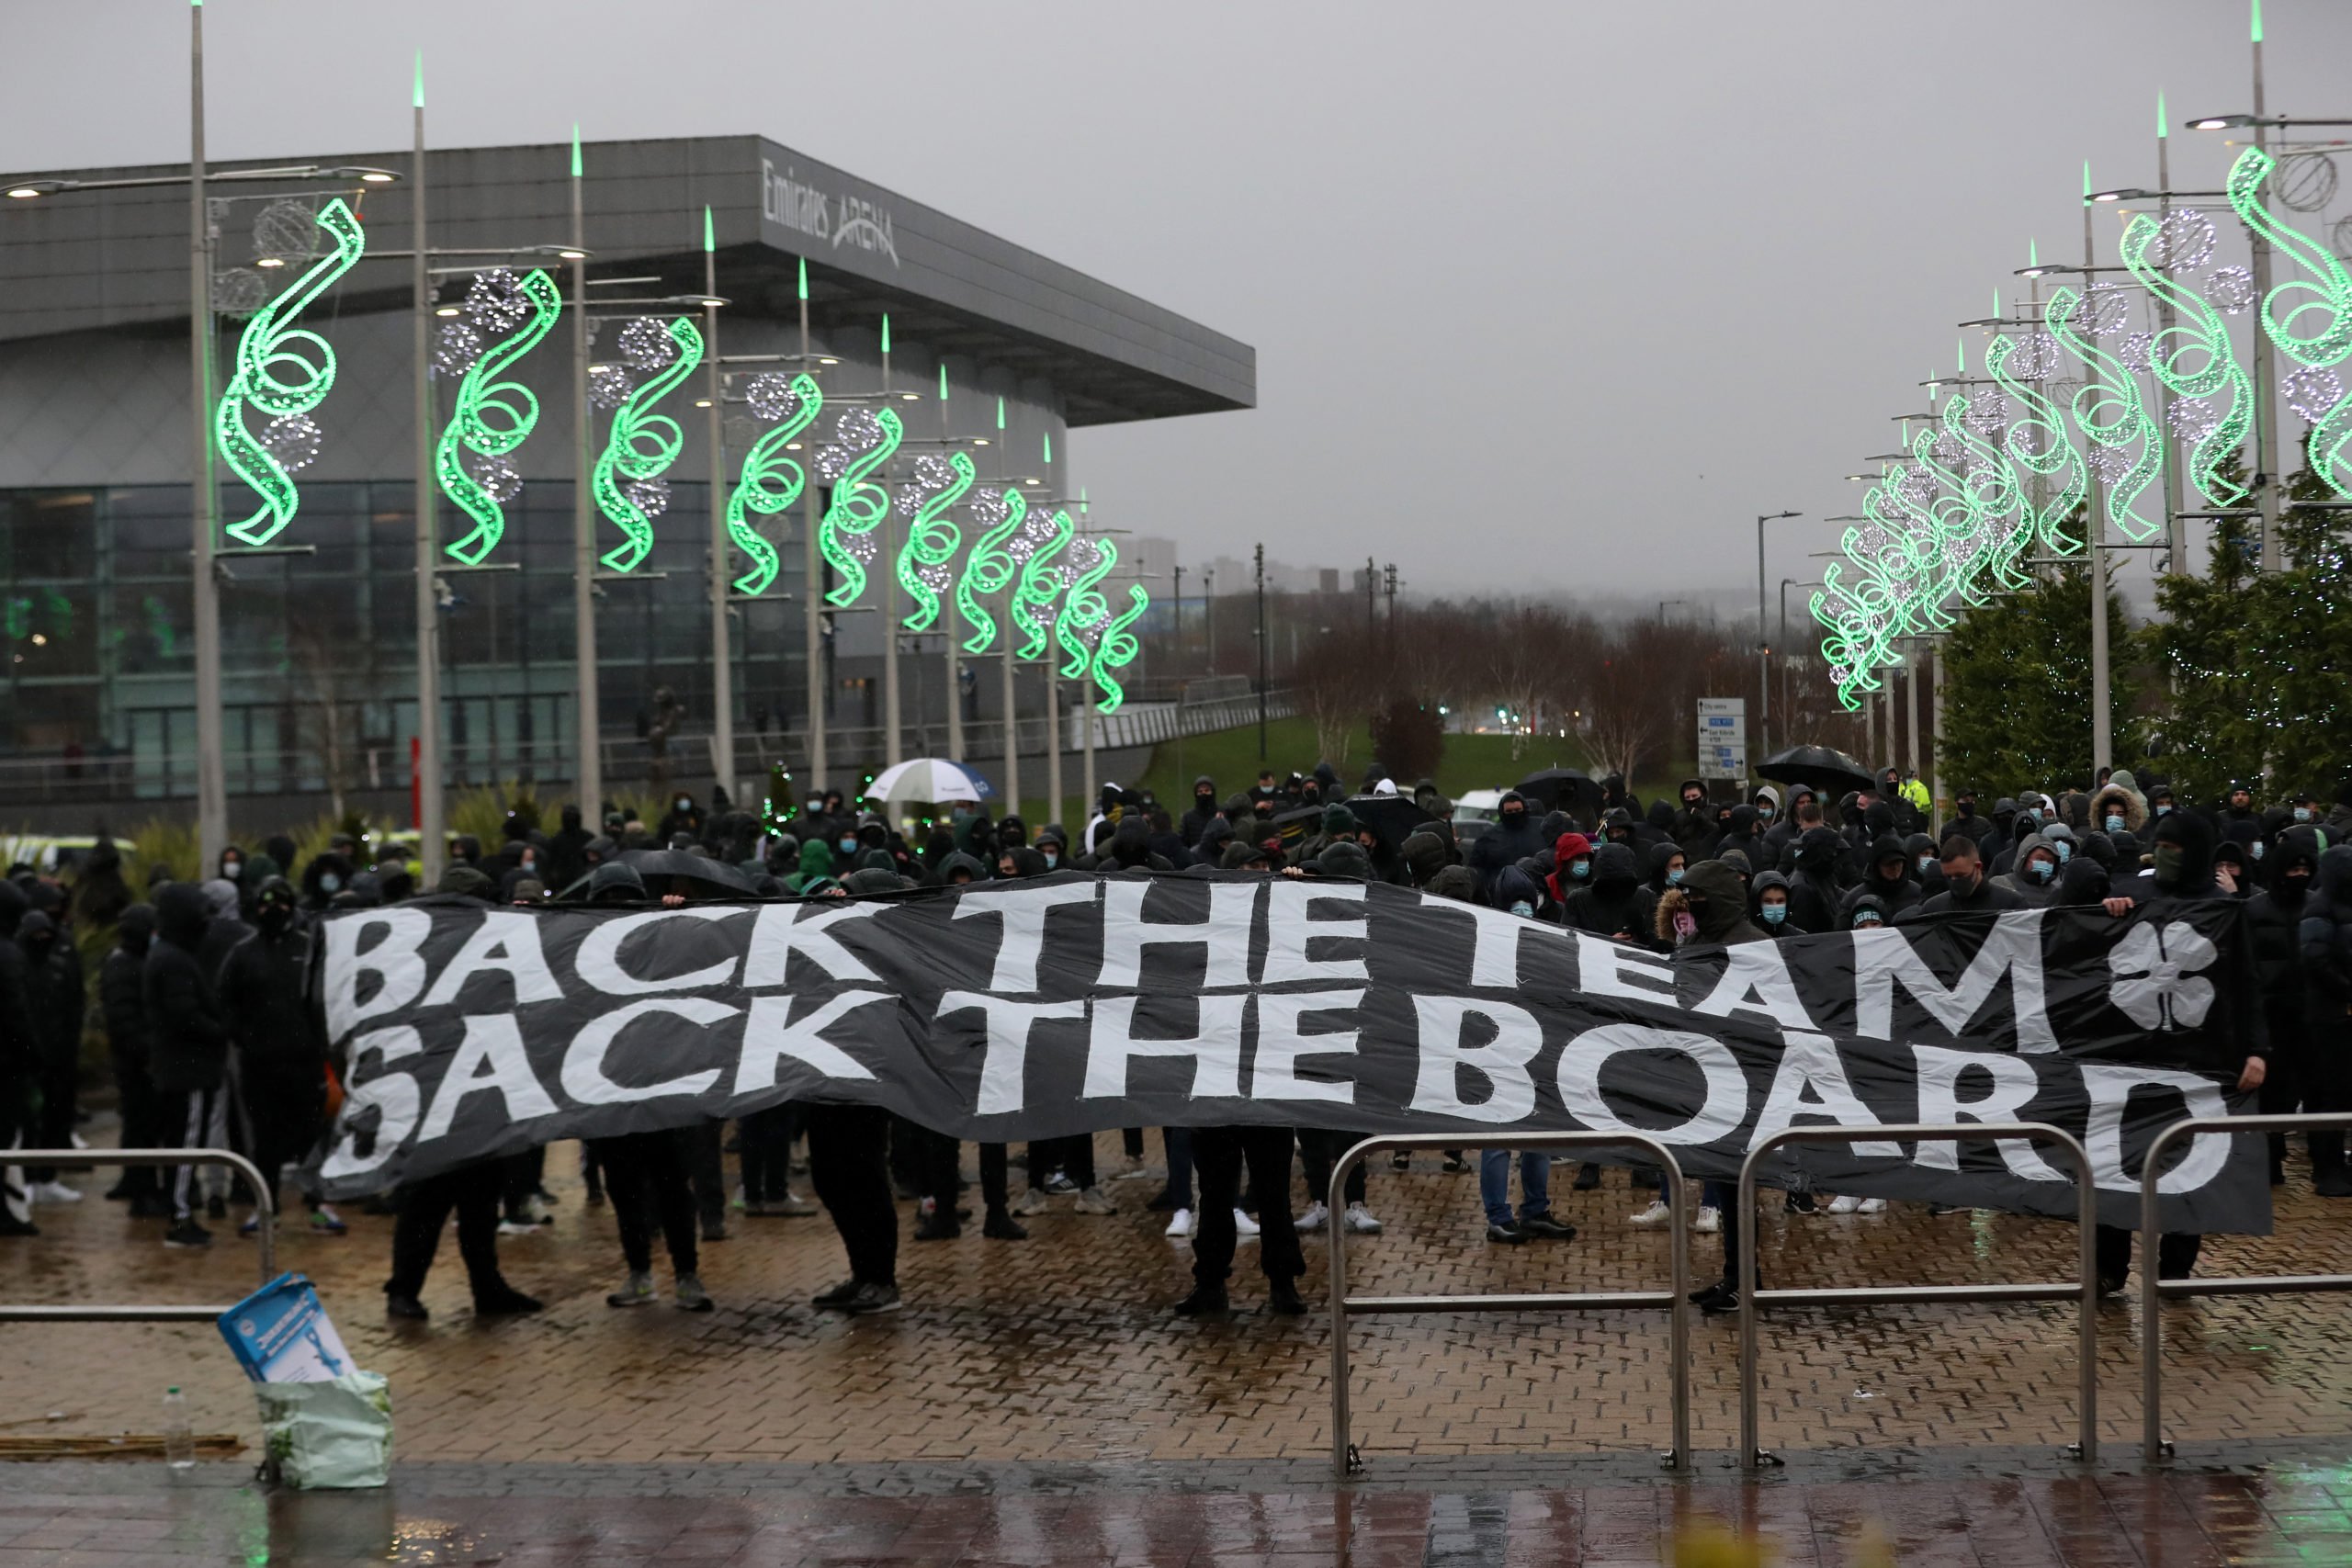 "No well run club behaves in this way"; Celtic supporters' group speak out against board